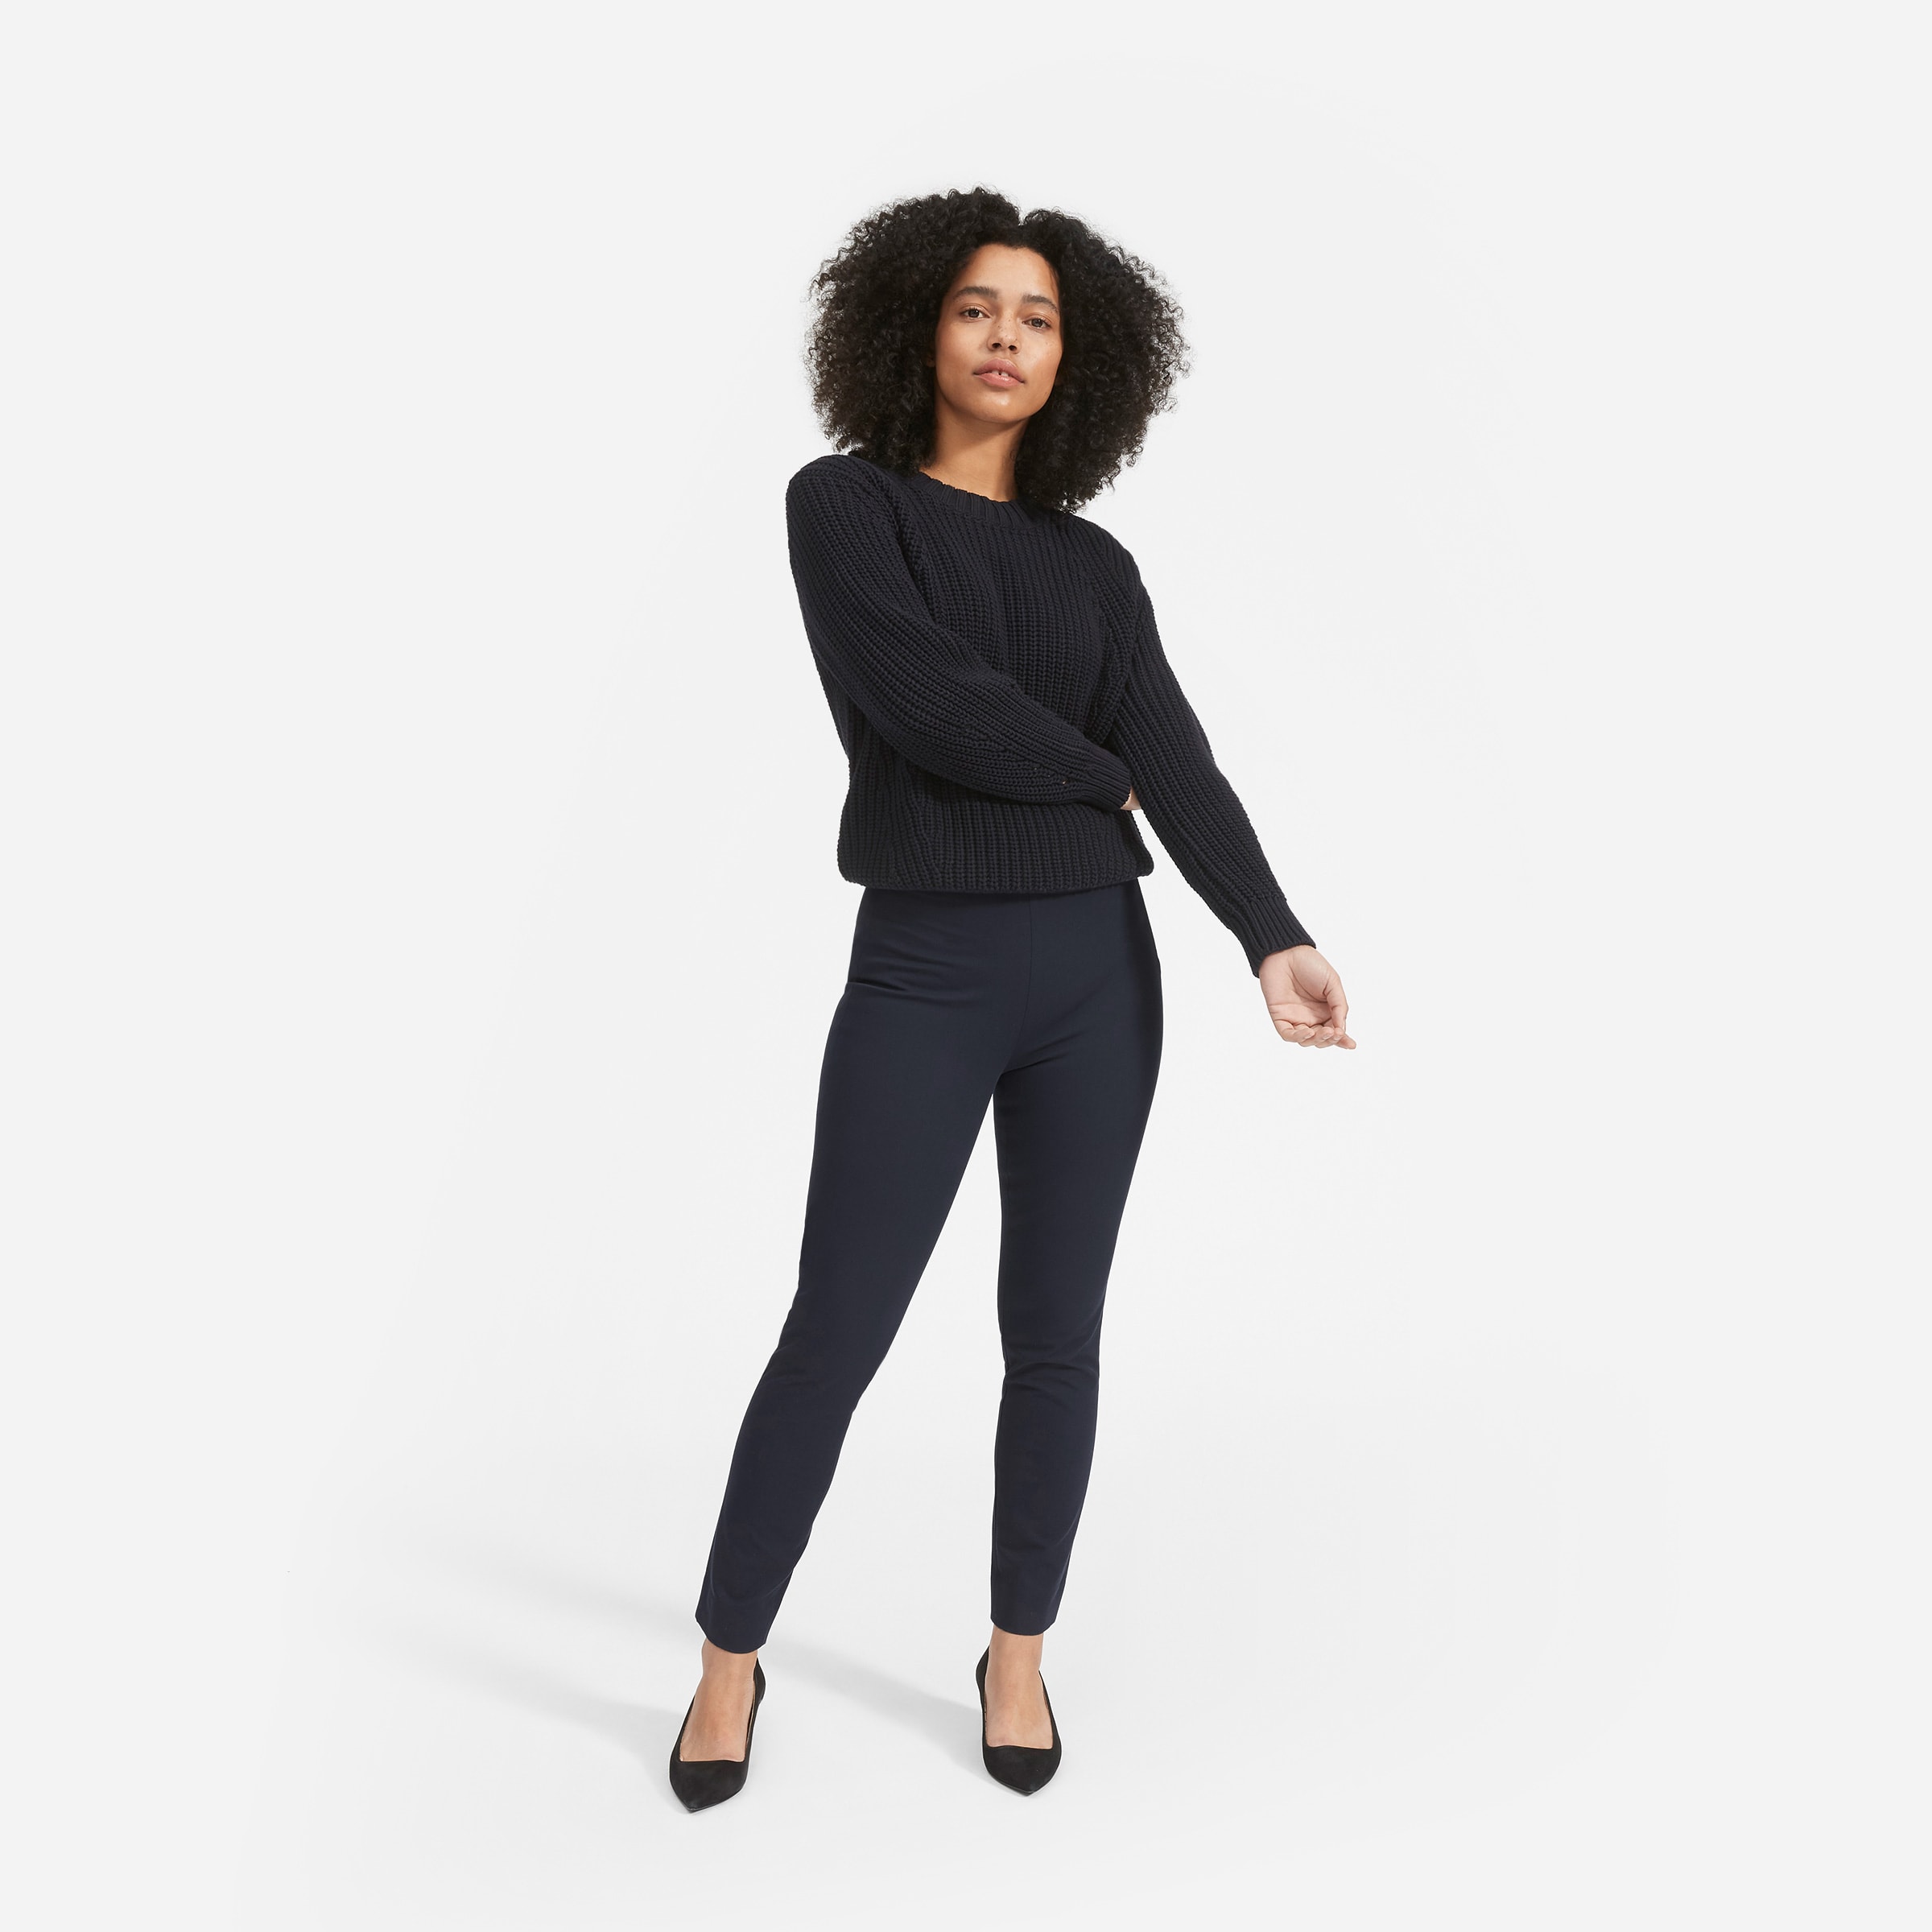 Everlane Just Made Your New Favorite Work Pants (and They're Under